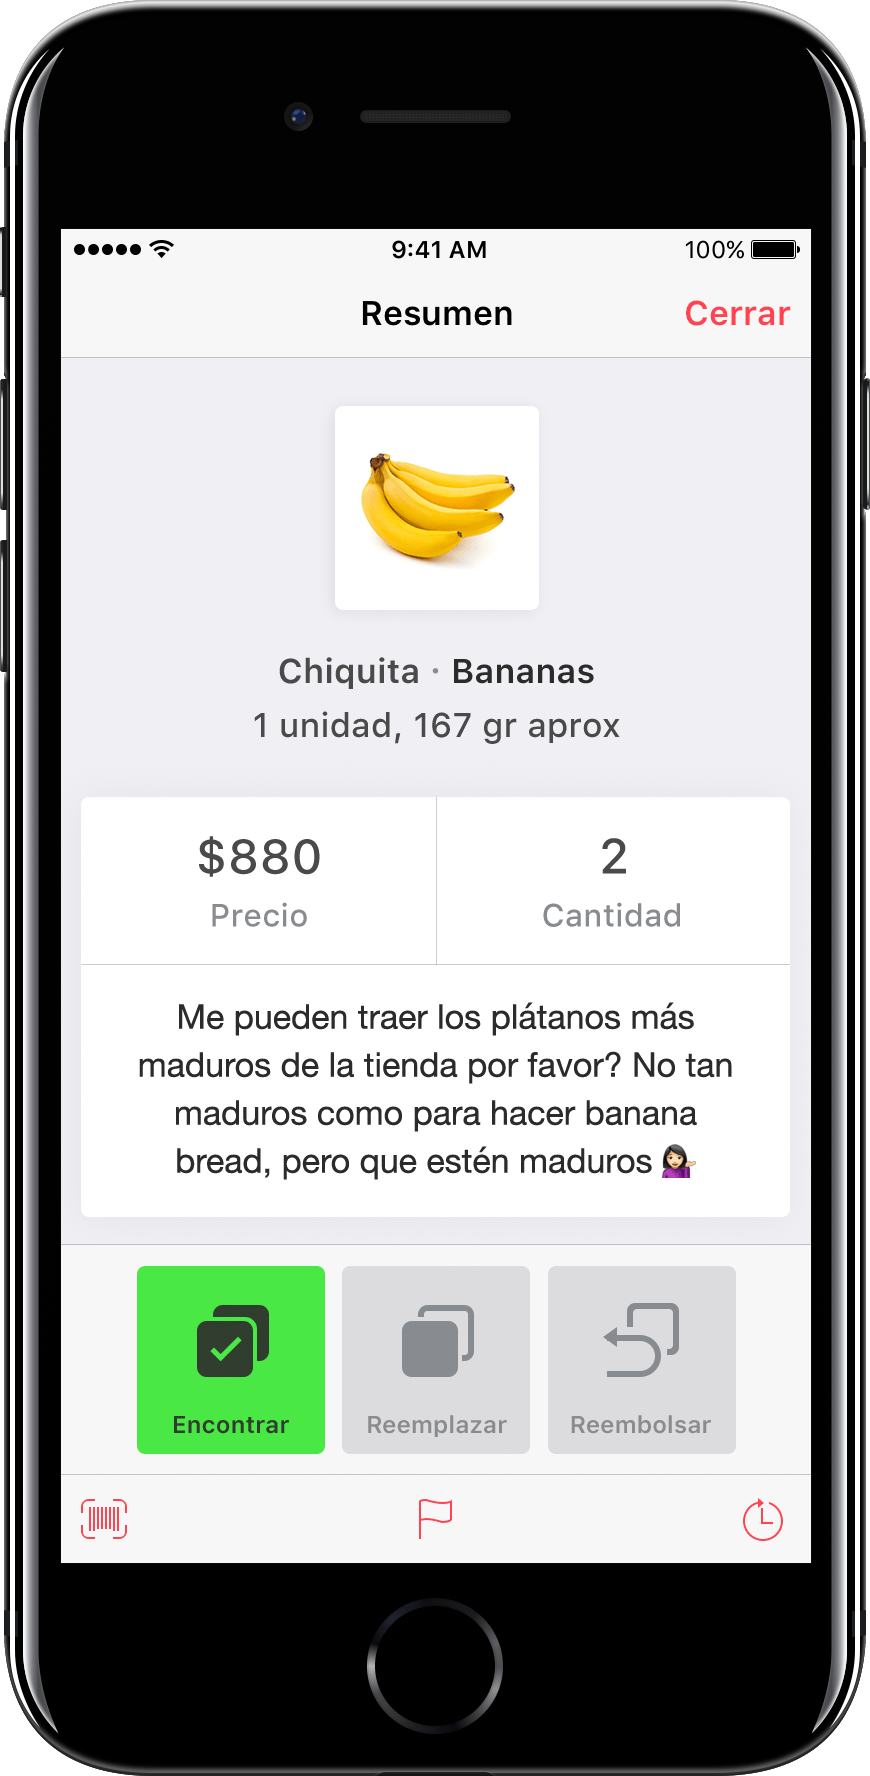 iPhone displaying an app for picking groceries. It shows the customer has requested 2 ripe bananas, and there's different options to mark the product as found, offer a replacement, or give a refund.